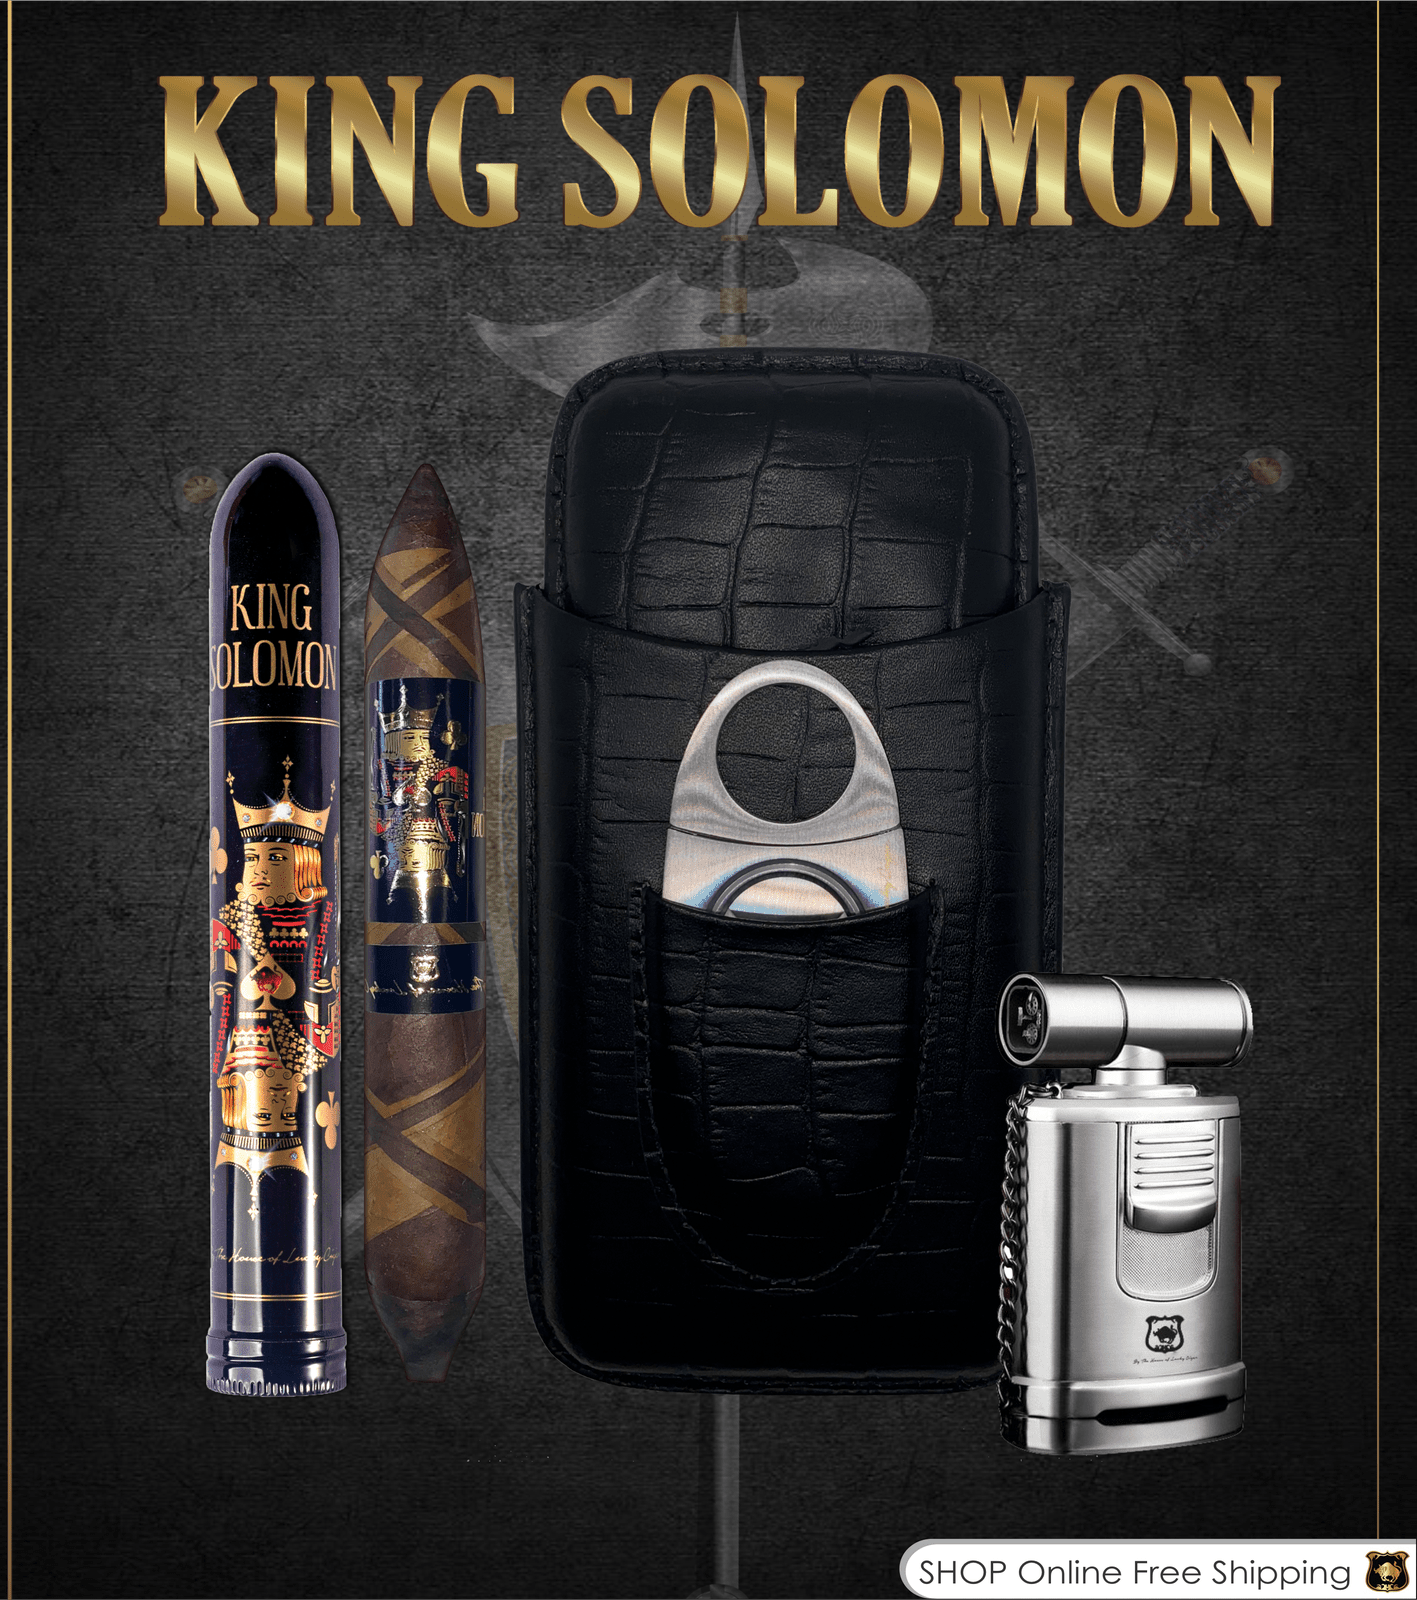 King Solomon / BLACK LEATHER CASE WITH STAINLESS STEEL CUTTER / LUCKY MACHINE GUN 4 JETS TORCH TABLE LIGHTER